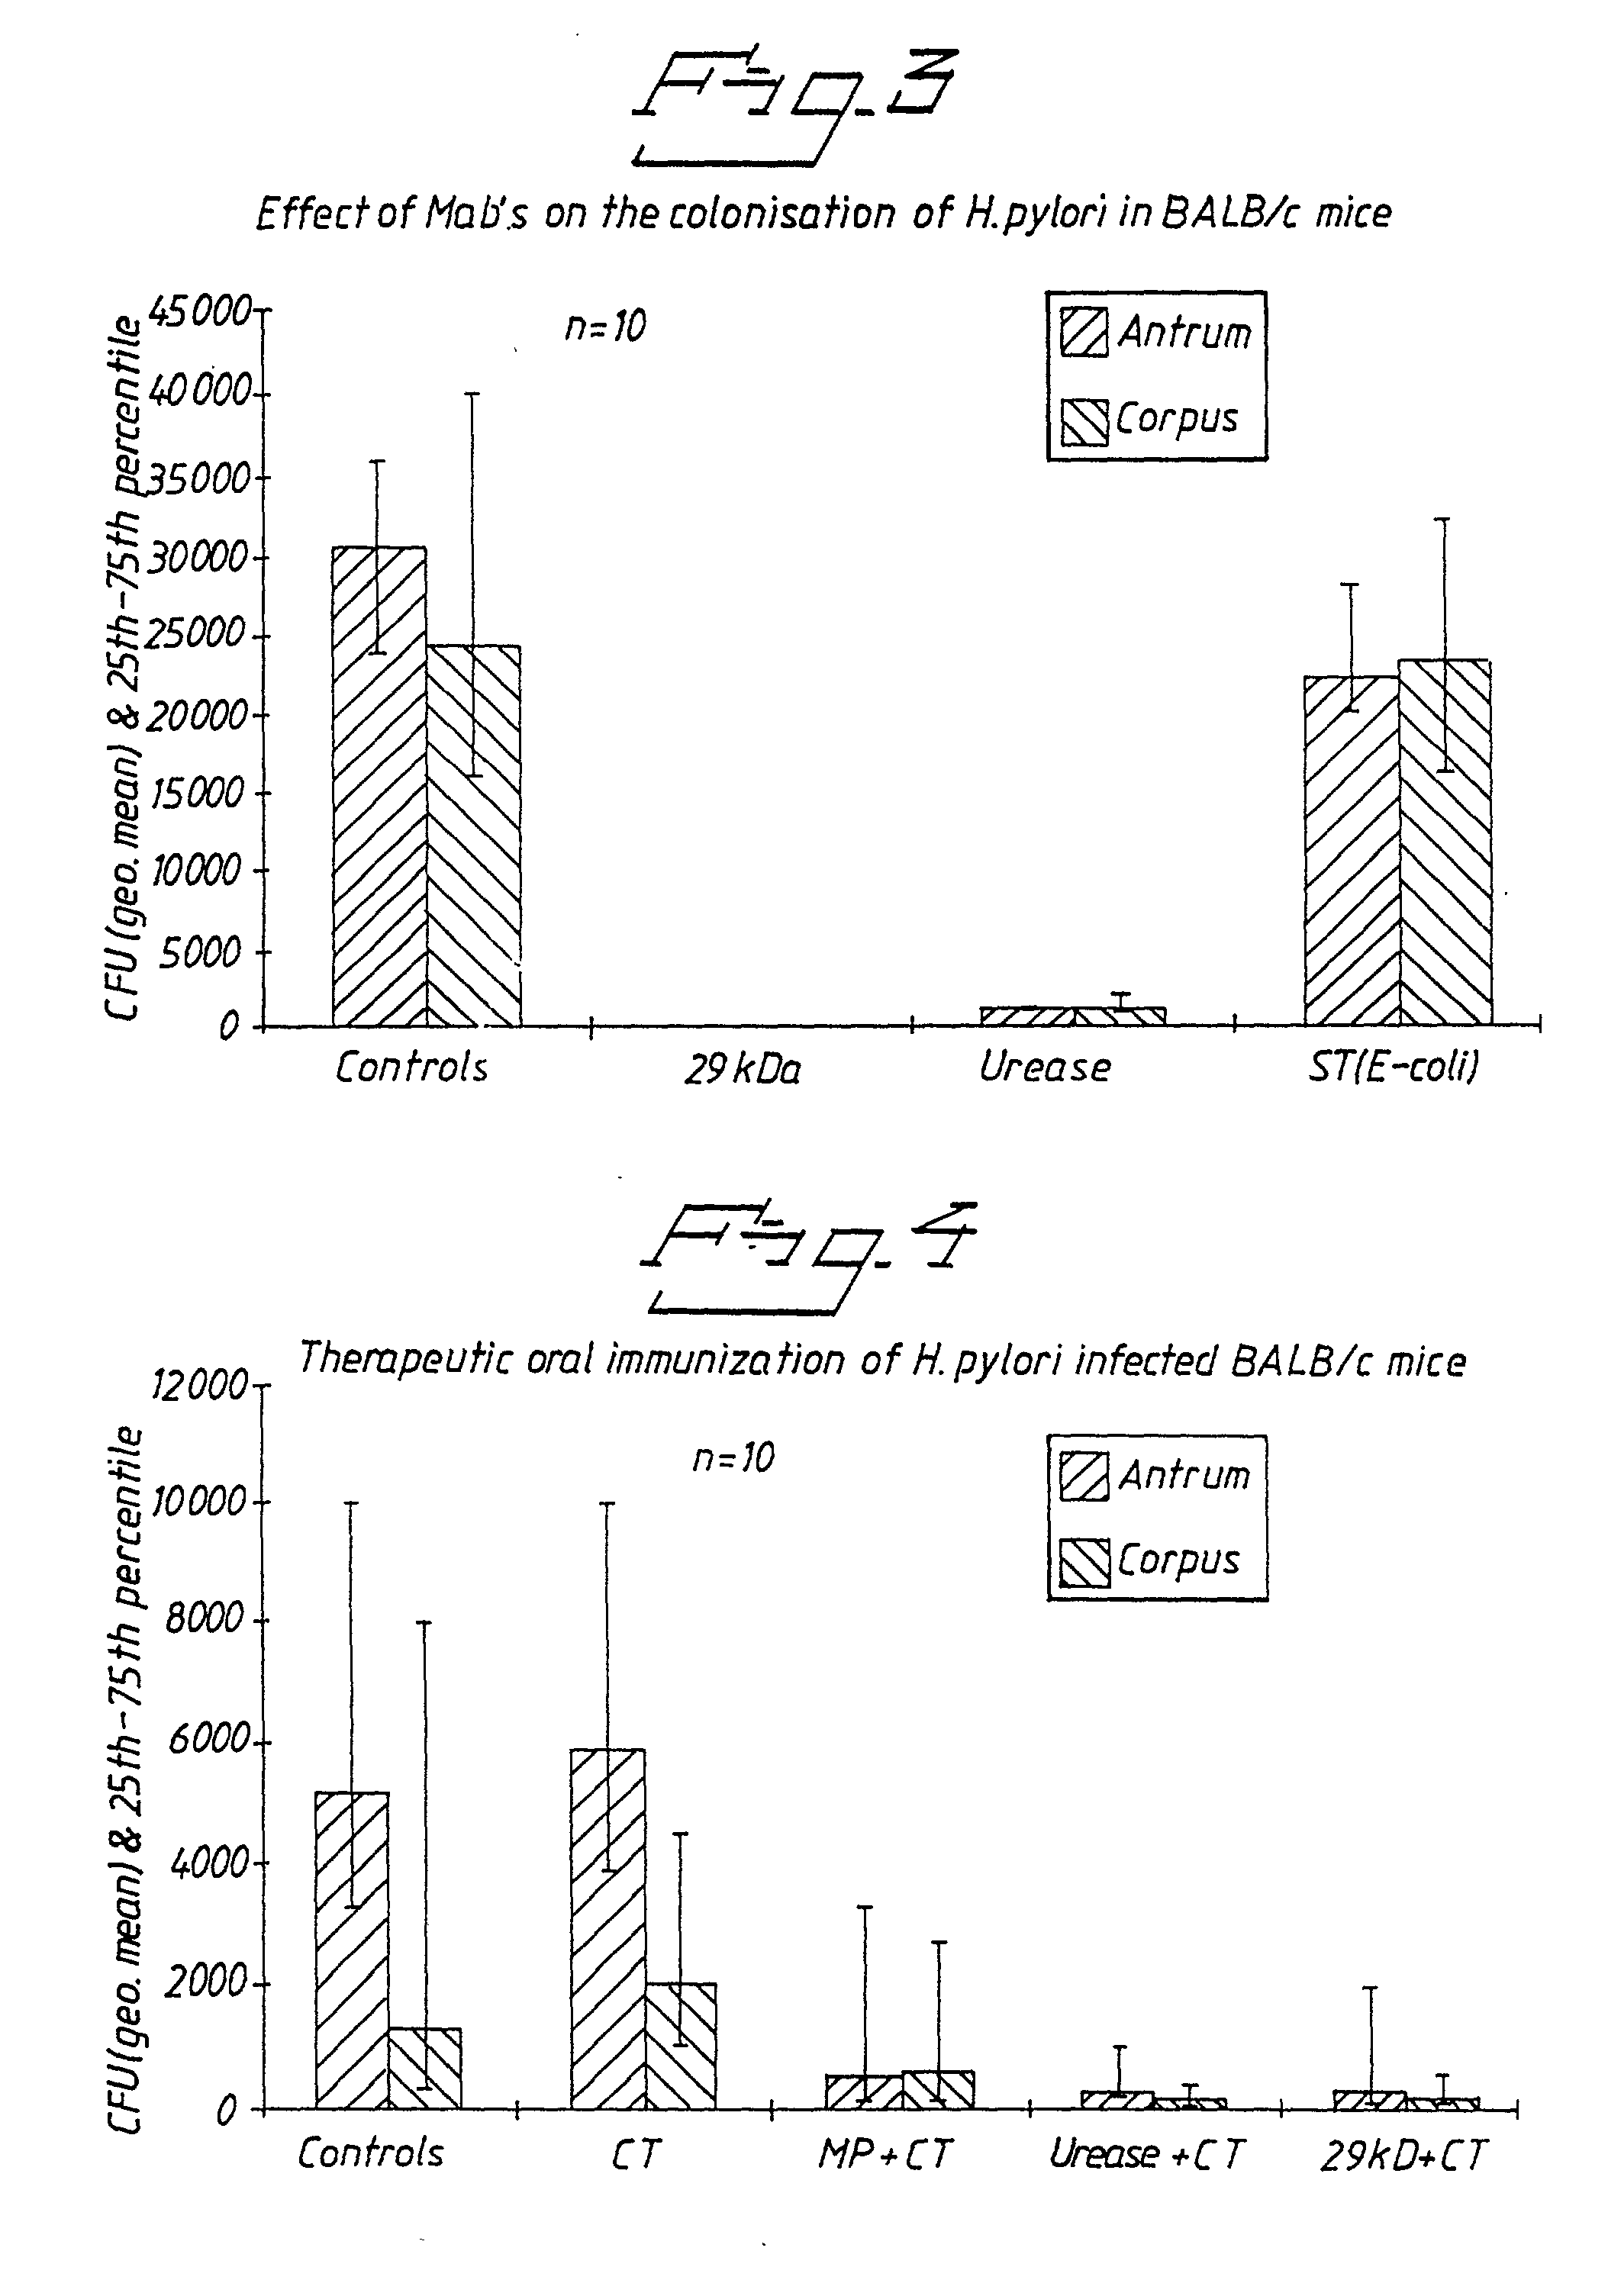 Bacterial antigens and vaccine compositions